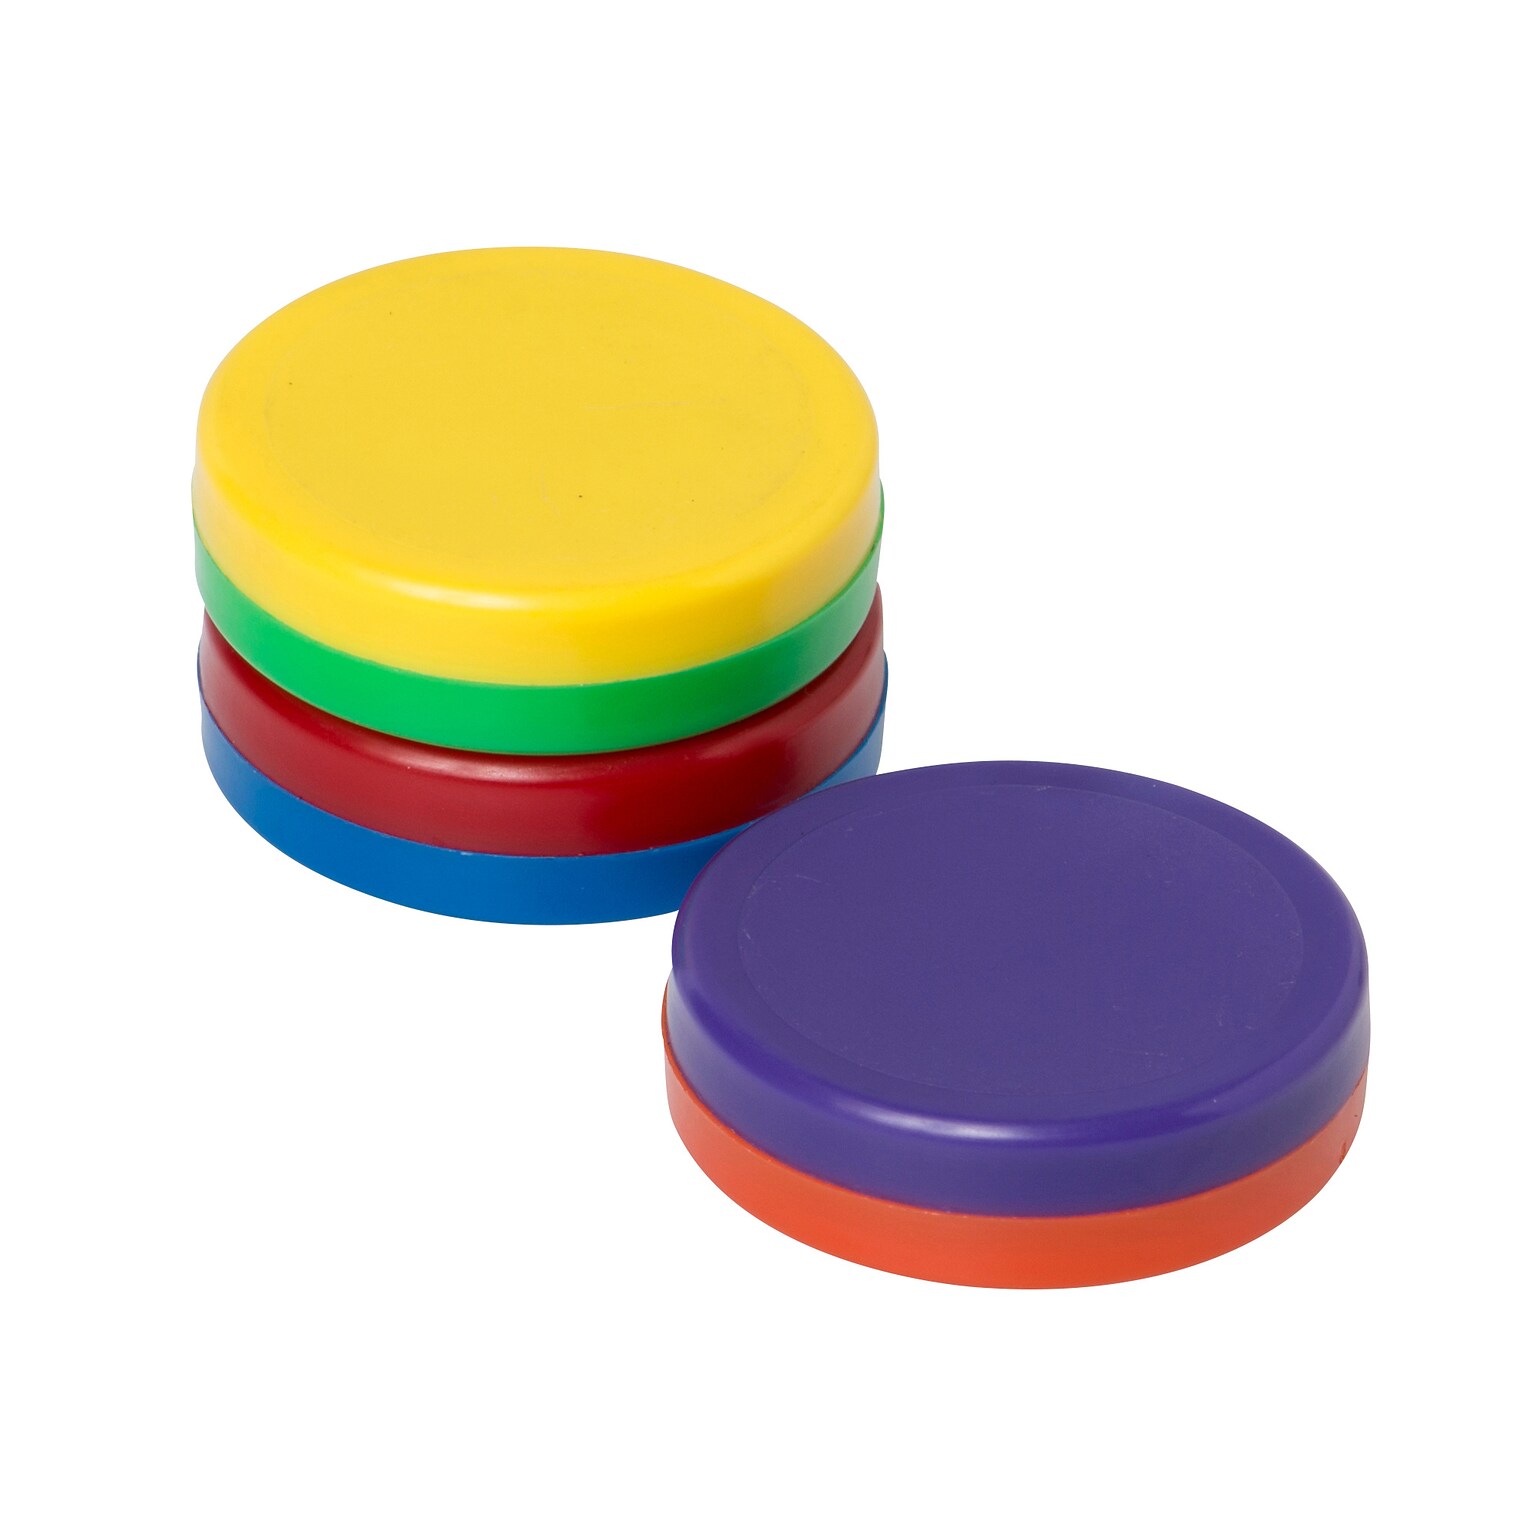 Dowling Magnets Big Button Magnets, 6 sets of 3 (DO-735014)